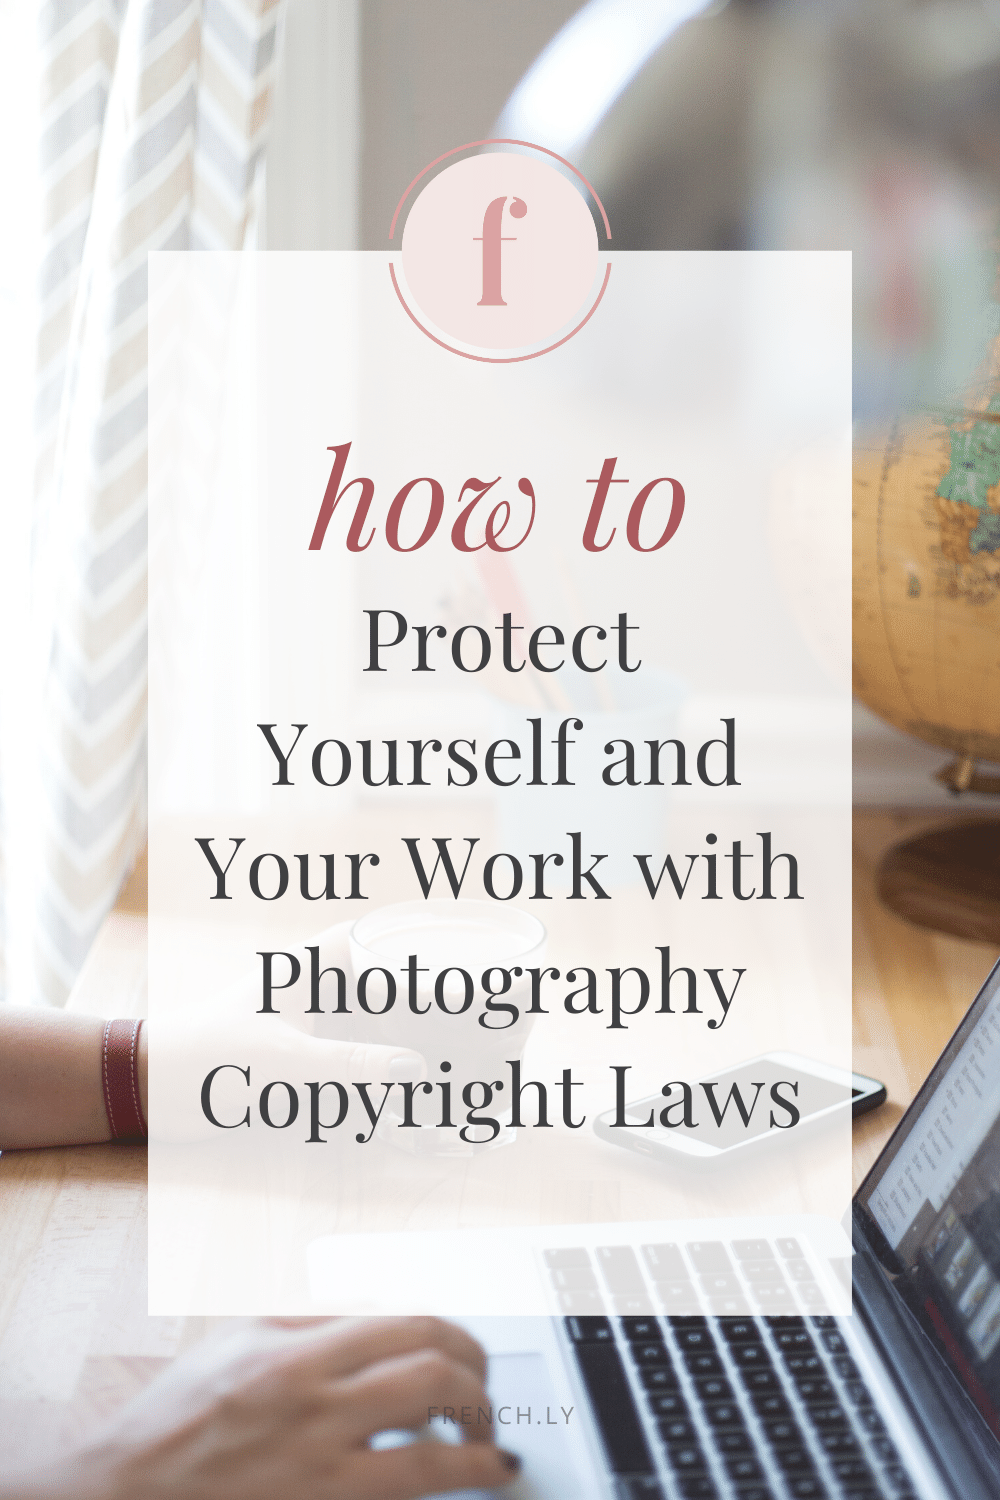 How to Protect Yourself and Your Work with Photography Copyright Laws | Frenchly Food + Product Photography